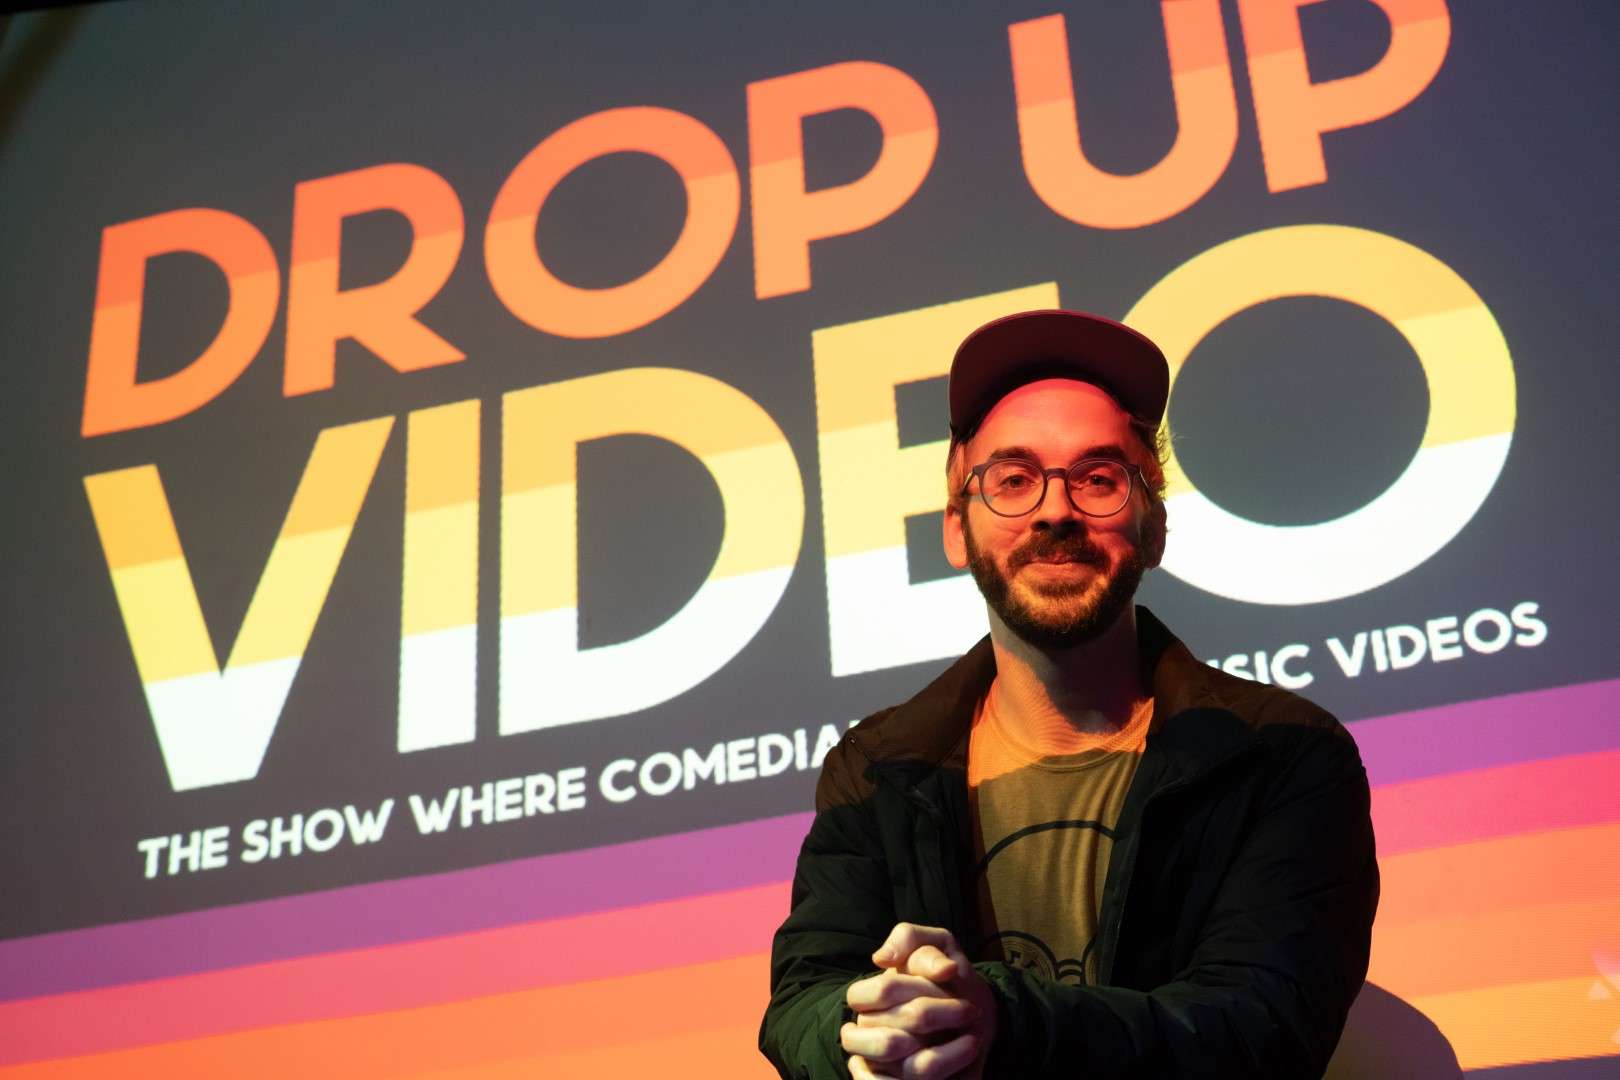 the host of Drop Up Video comedian Justin Thompson